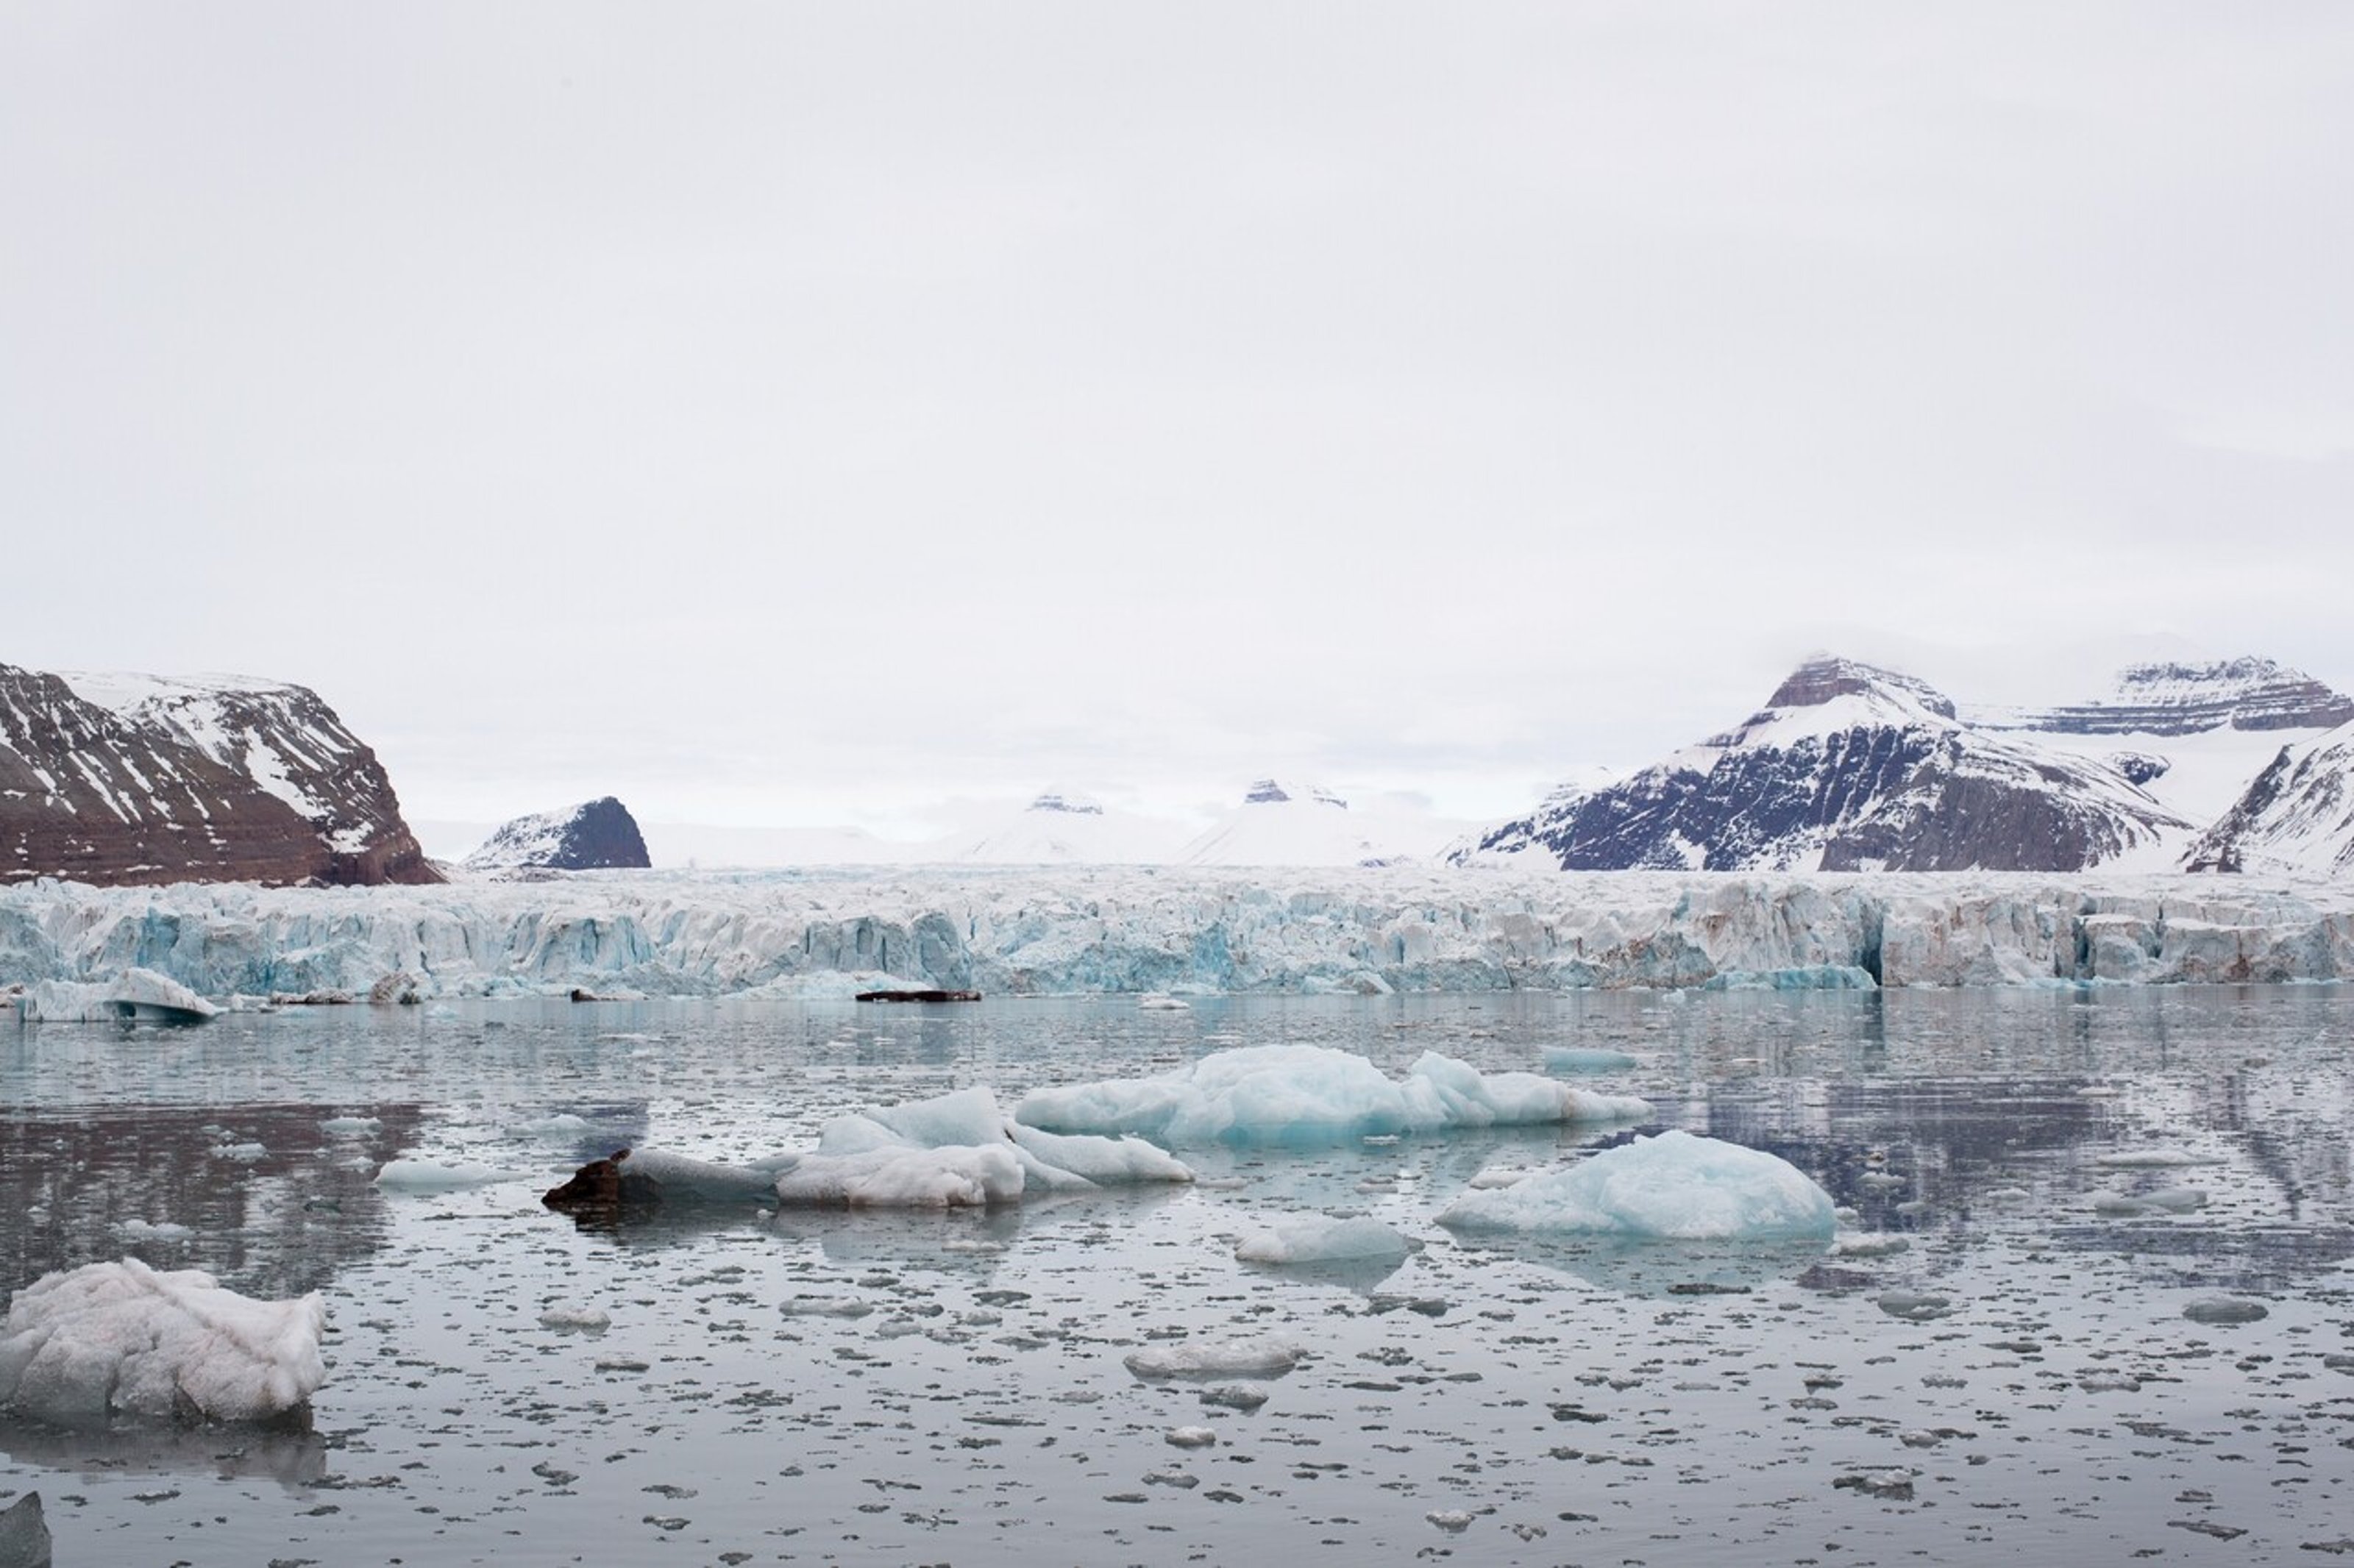 Floating icebergs, with glaciers in the background.